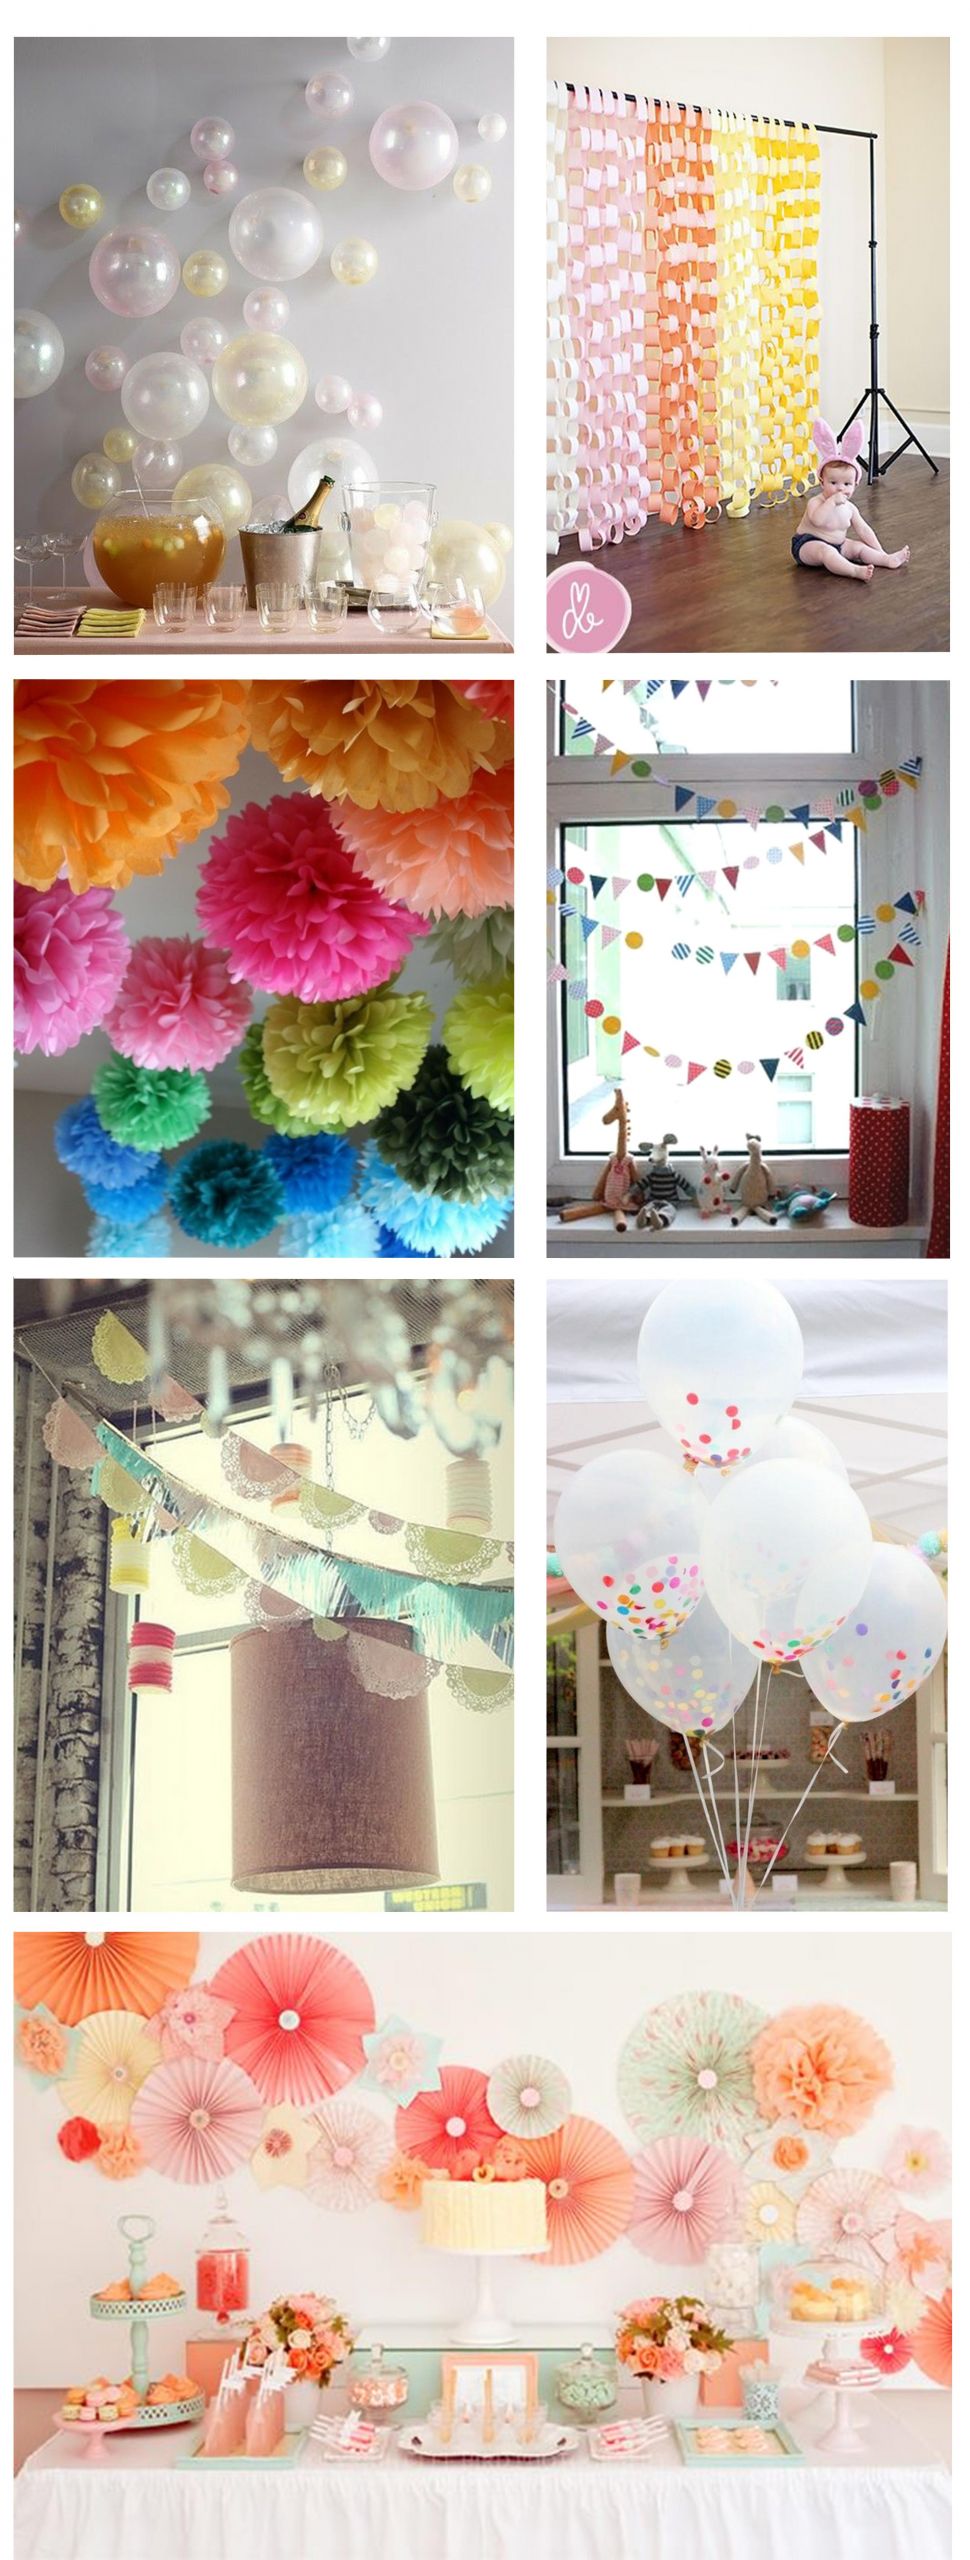 DIY Party Decor Ideas
 Ideas for home made party decorations